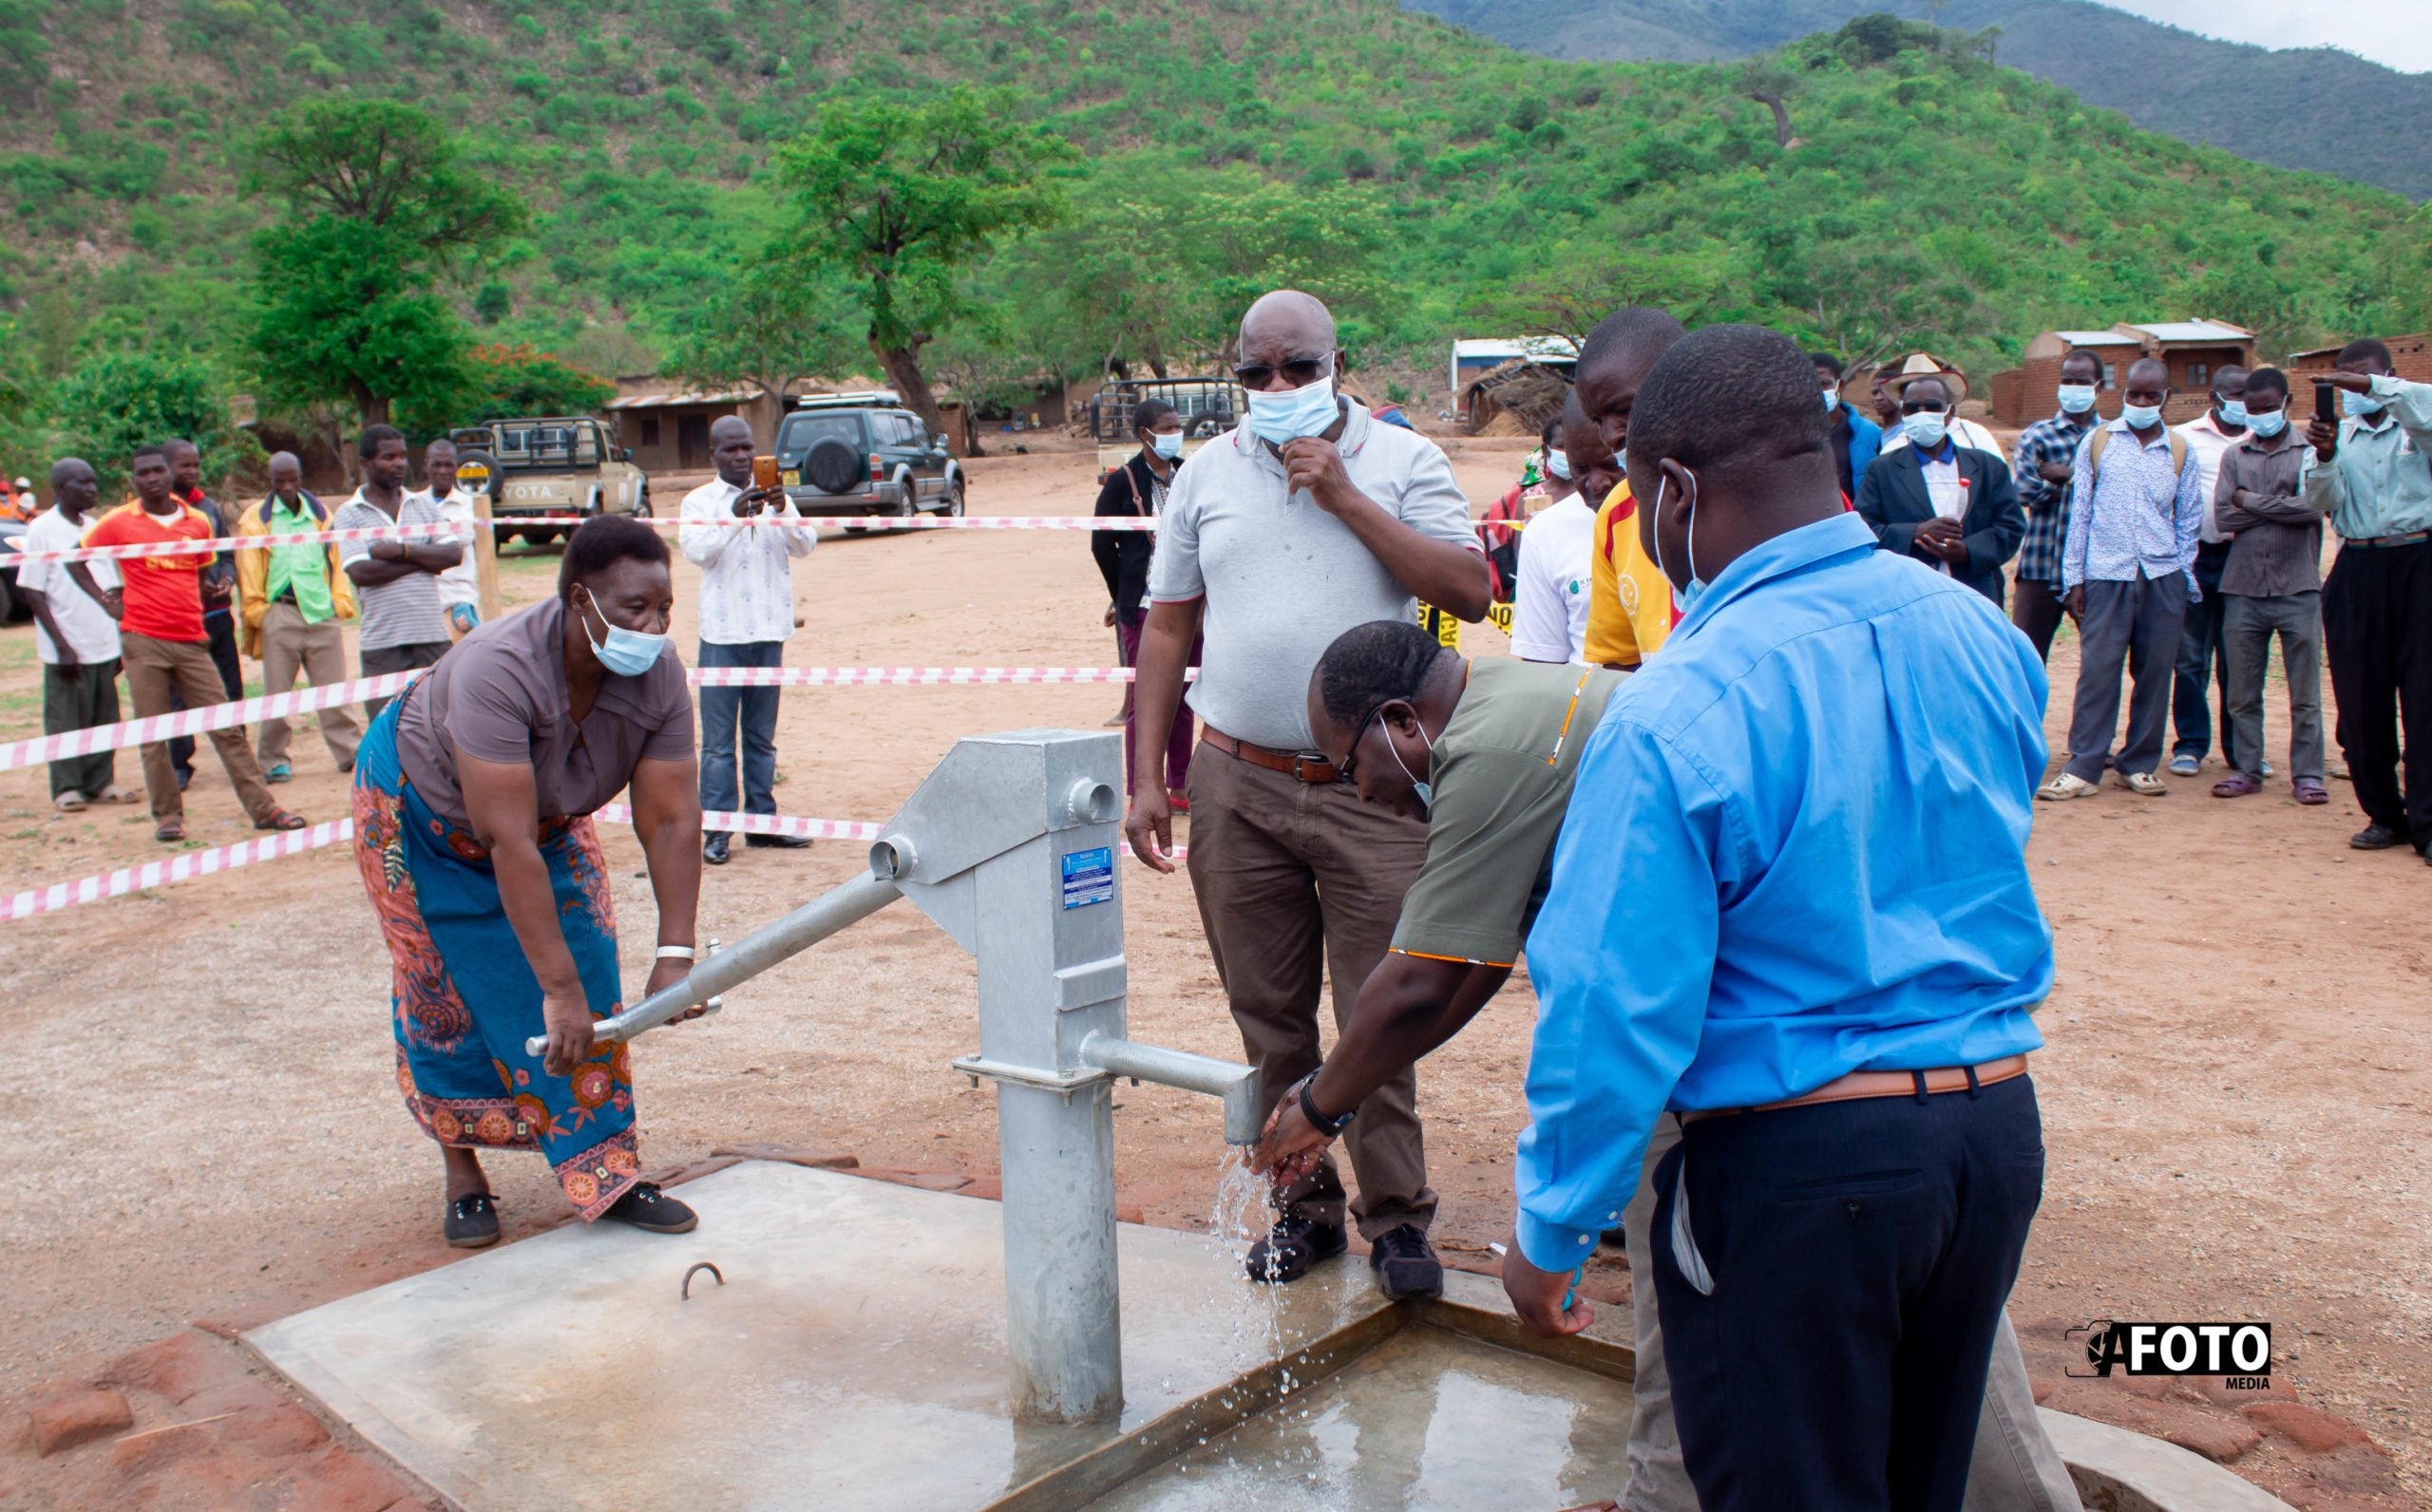 Mkango country administrator Effie Likaku pumps water from newly launched borehole as country director Kachinjika looks on